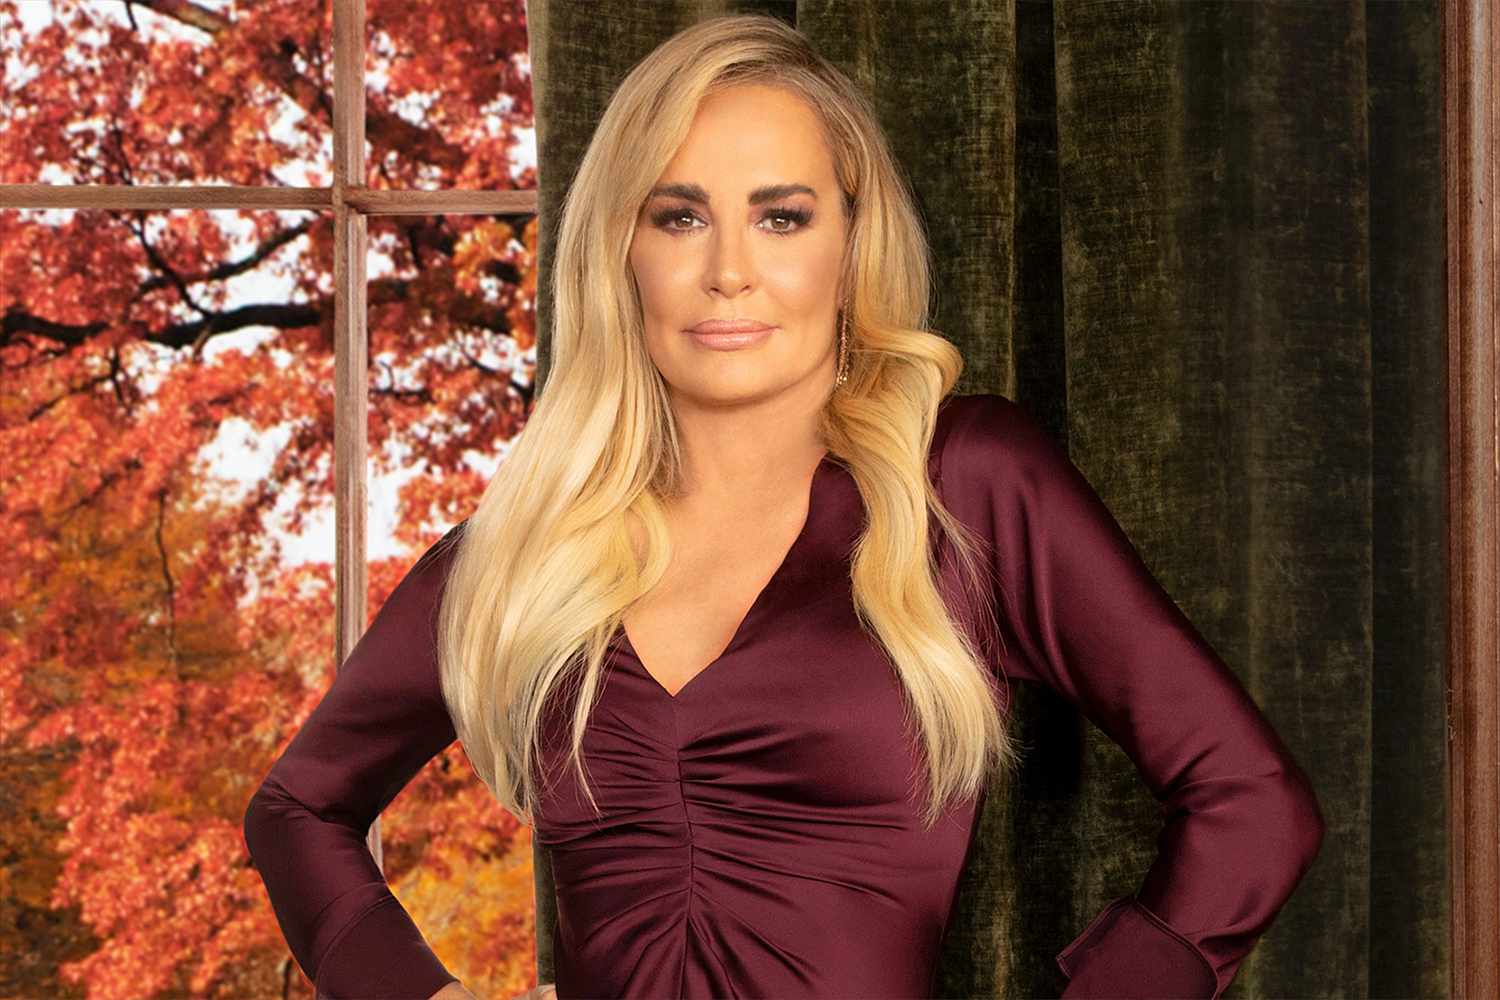 Taylor Armstrong becomes the first 'Real Housewives' star to switch franchises